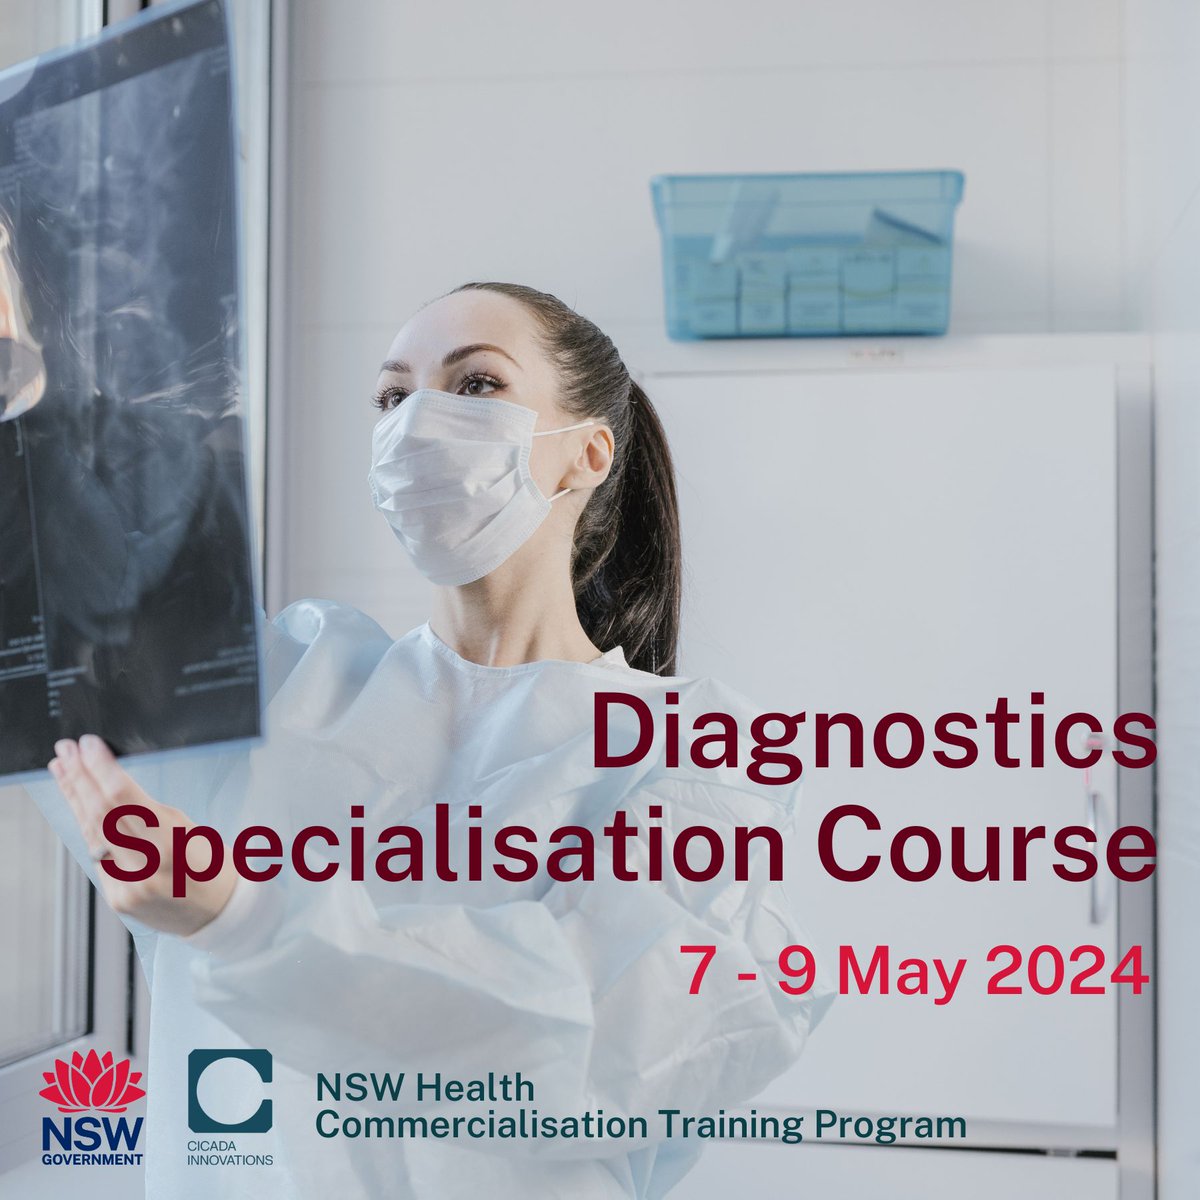 Join the FREE #Diagnostics specialisation course online/in-person, part of the @NSWHealth Commercialisation Training Program. Learn from experts @PathTechnology and gain personalised feedback to help take your innovation to the market. hubs.li/Q01z_VTG0